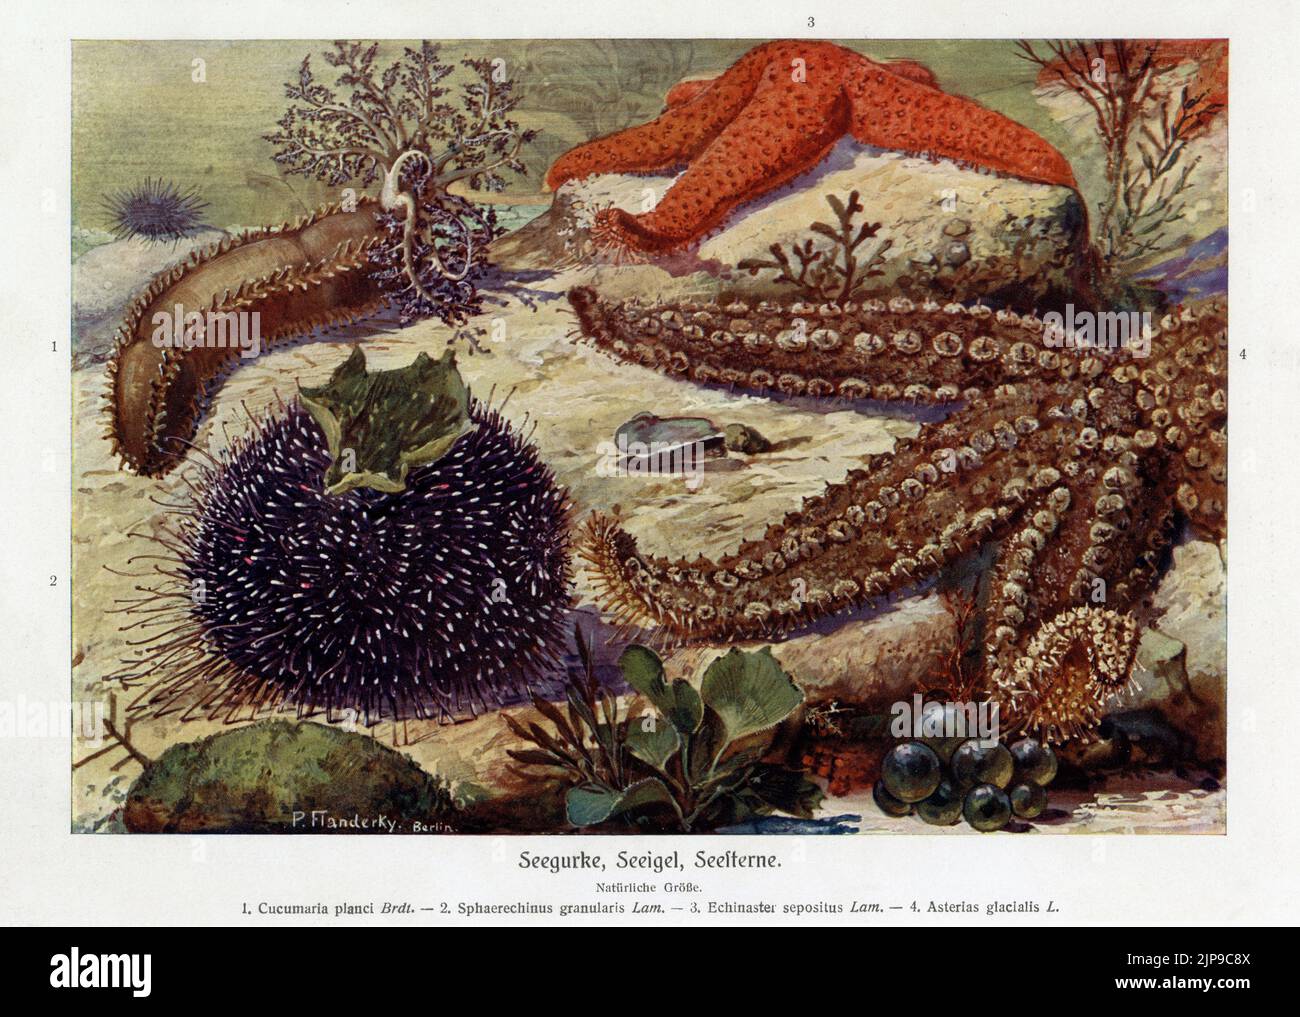 Seabed marine invertebrates:  Sea Cucumber (Cucumaria planci), Violet or Purple Sea Urchin (Sphaerechinus granularis), Red Starfish (Echinaster sepositus) and Spiny Starfish (Marthasterias glacialis). Depicted in a rare early 1900s German chromolithograph print of a painting by wildlife artist, Paul Flanderky (1872-1937).  It helped to illustrate the (1911-18) 4th edition of Brehms Tierleben (Brehm’s Animal Life). Stock Photo